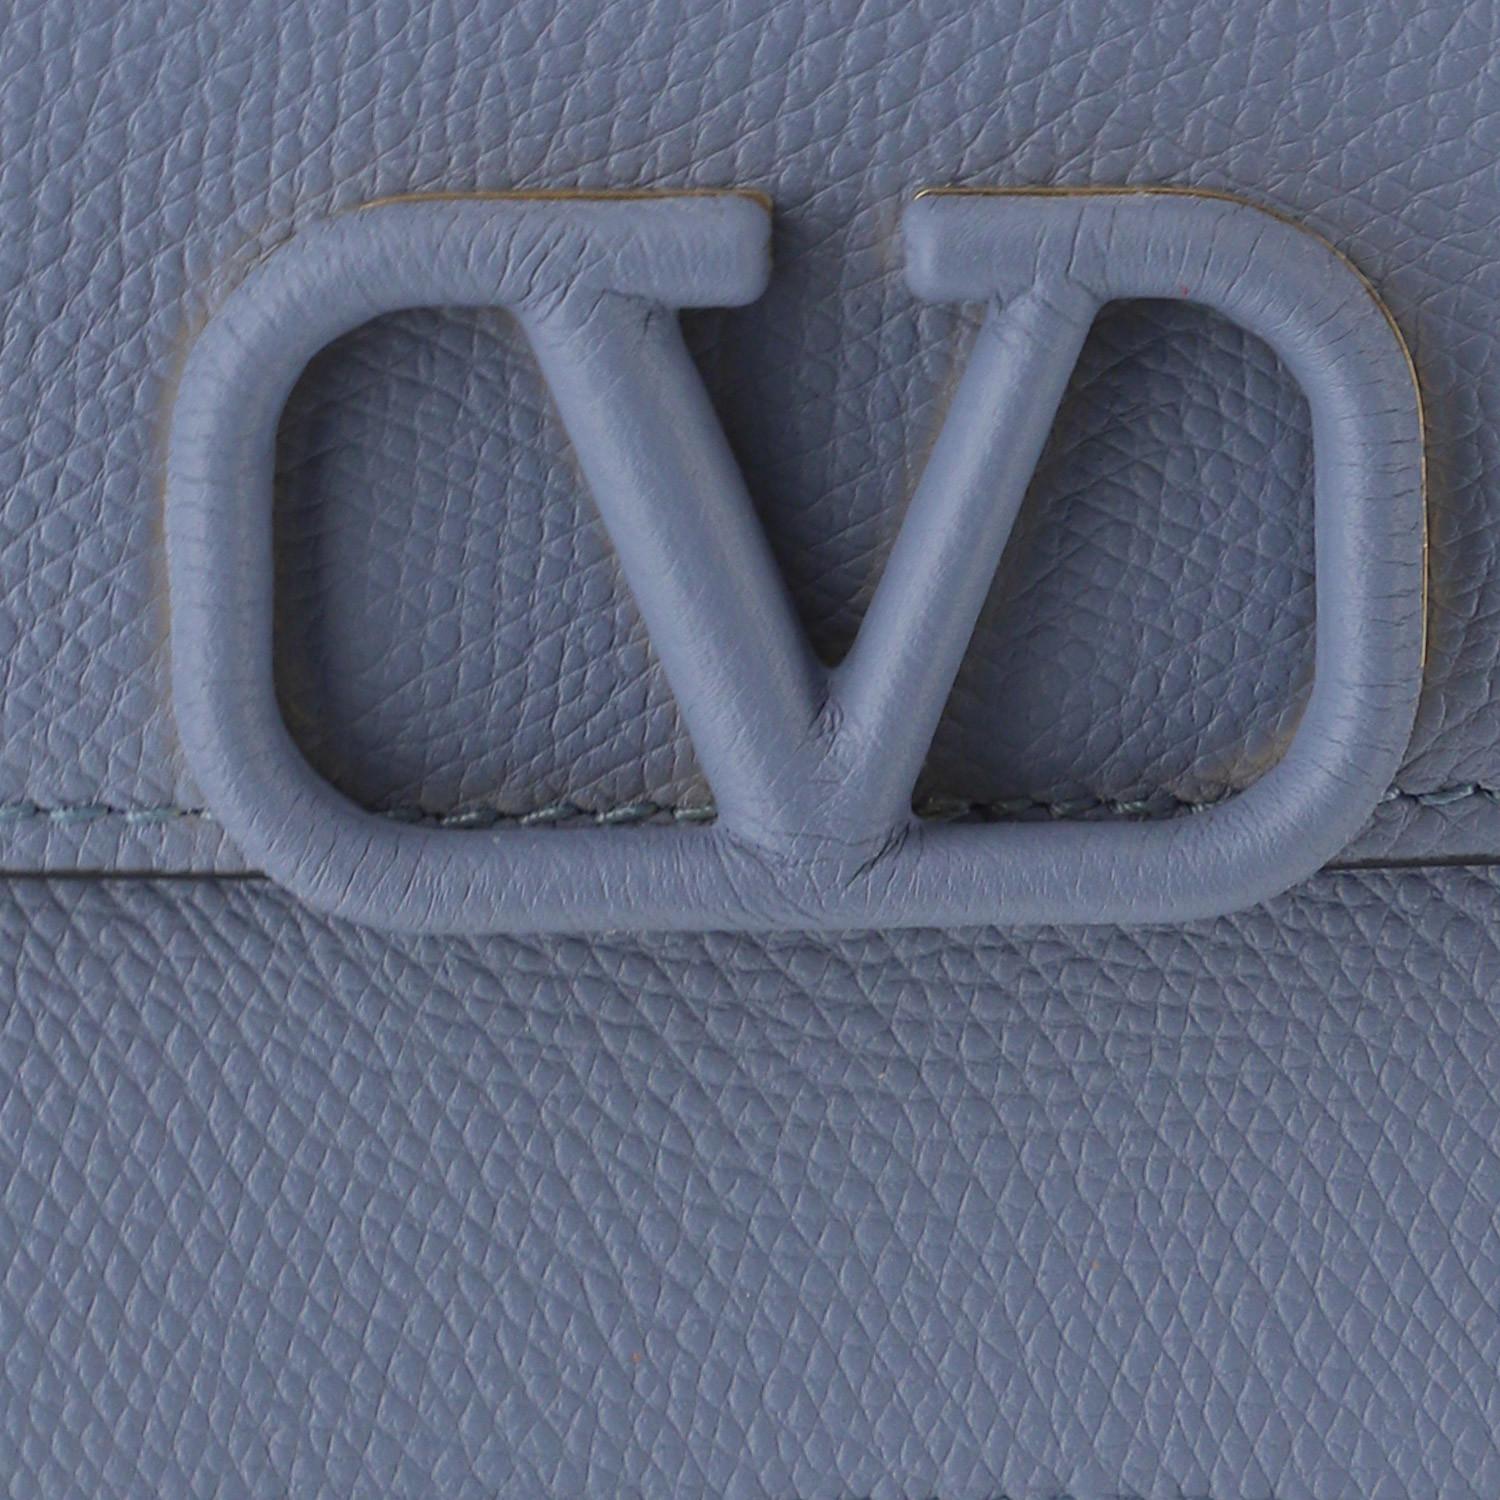 Valentino Baby Blue Leather Vsling Wallet on a Chain at FORZIERI